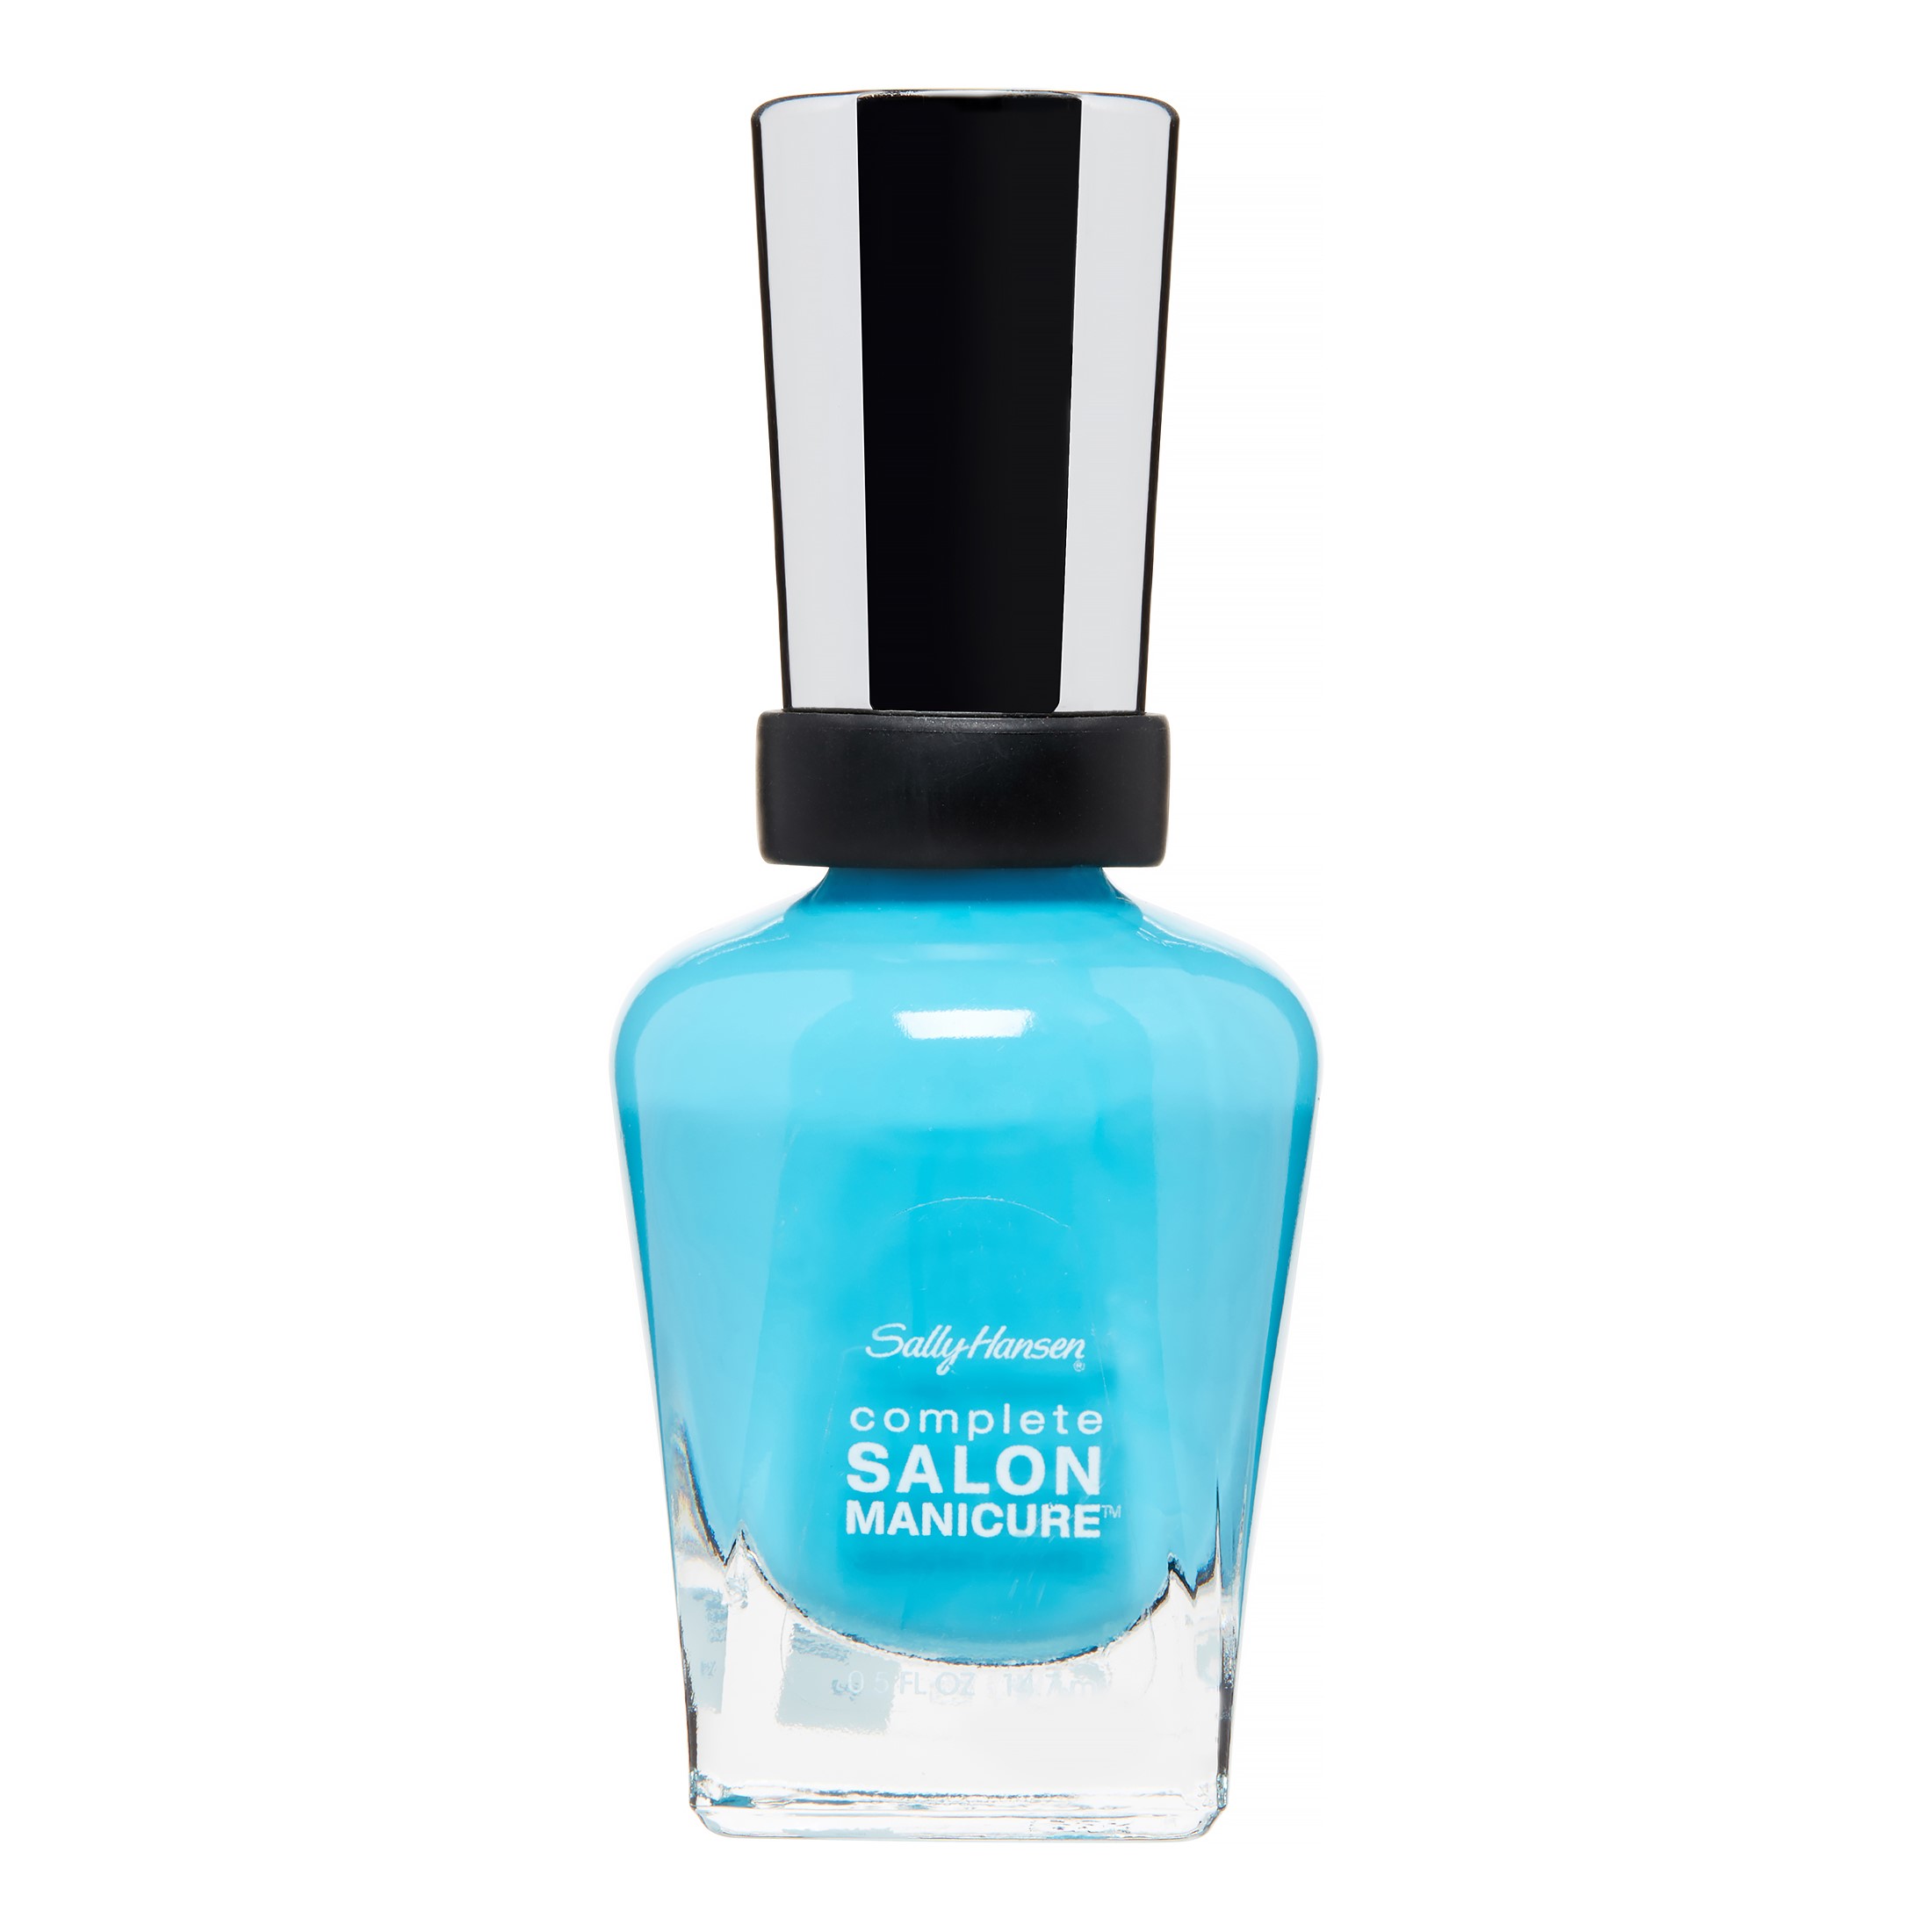 Sally Hansen Complete Salon Manicure Nail Polish, Water Color - image 1 of 3